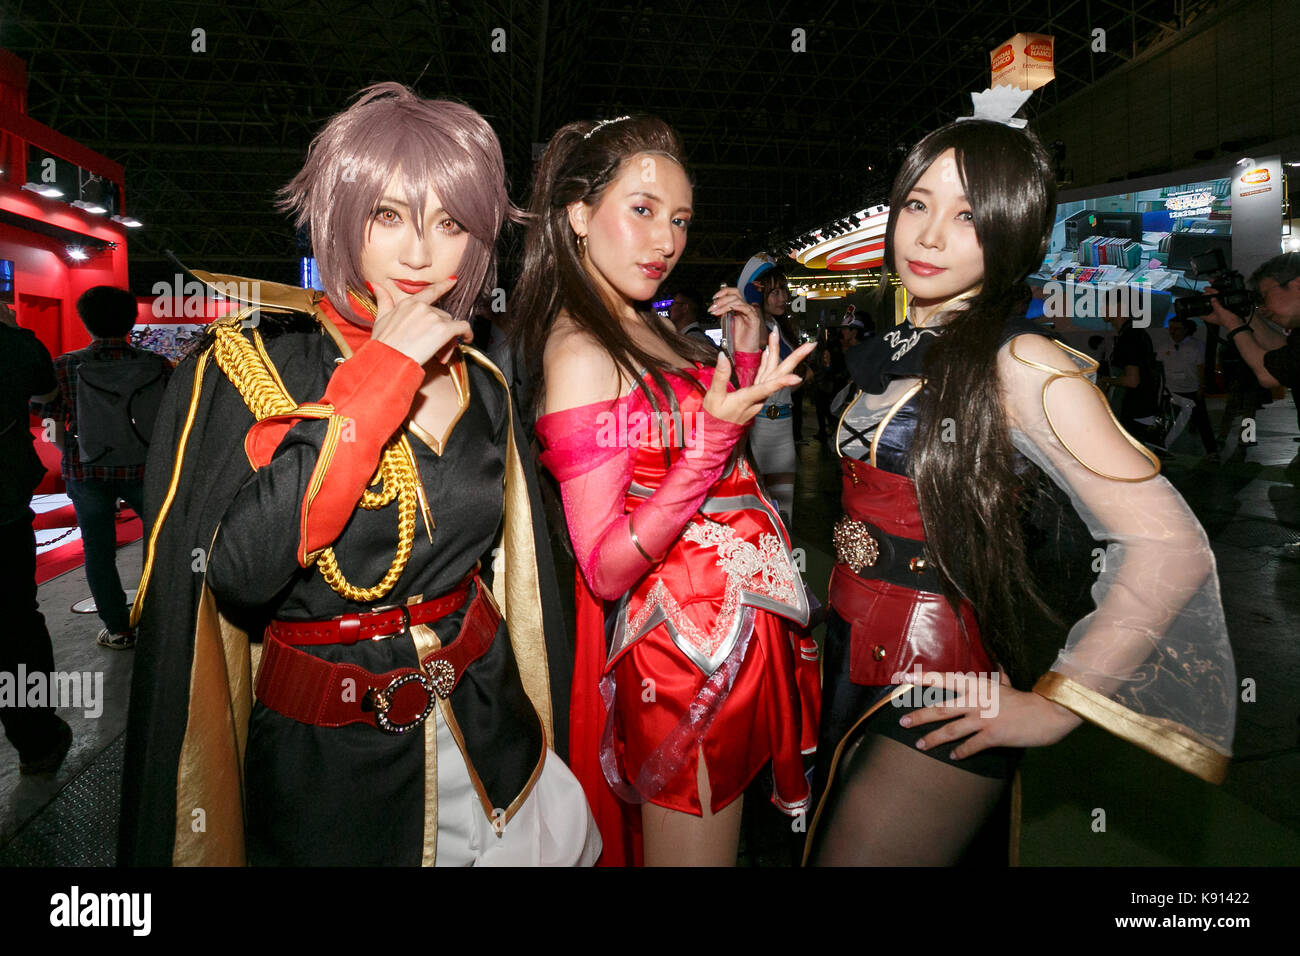 Chiba, Japan. 21st Sep, 2017. Cosplayers pose for a photograph during the Tokyo Game Show (TGS 2017) on September 21, 2017, Chiba, Japan. This year's event hosts 609 companies from 36 different countries, introducing 1,317 video game titles for smartphones, games consoles, VR, AR and MR platforms. The show, which expects to attract 250,000 visitors, runs until September 24 at the International Convention Complex Makuhari Messe in Chiba; and will be streamed live around the world. Credit: Rodrigo Reyes Marin/AFLO/Alamy Live News Stock Photo